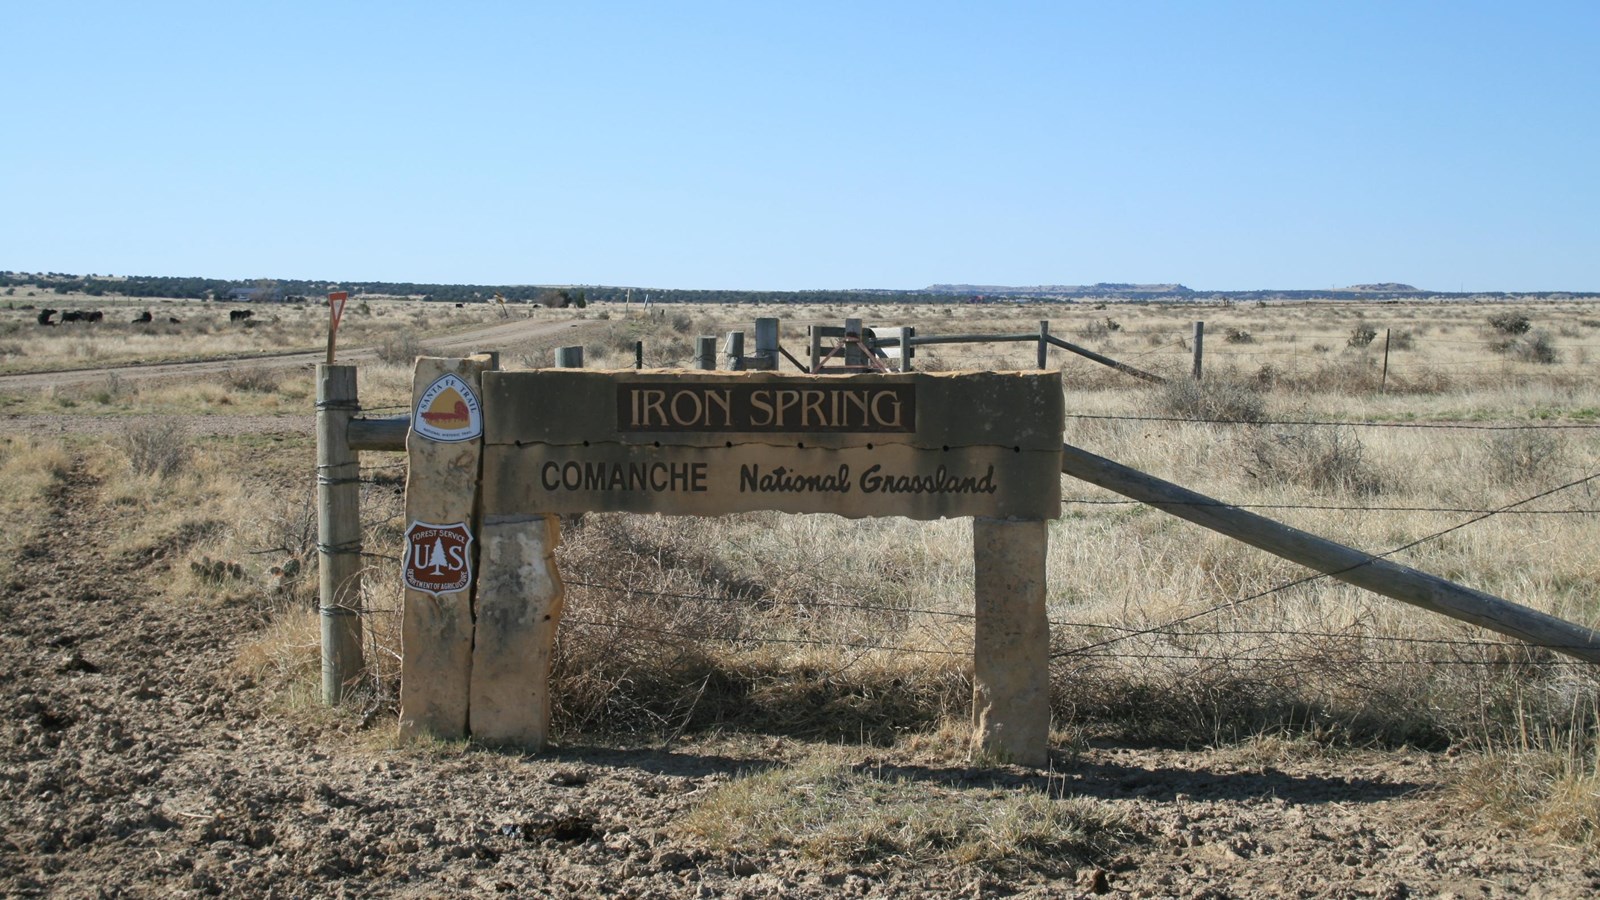 A wooden sign sits in front a grassy area.